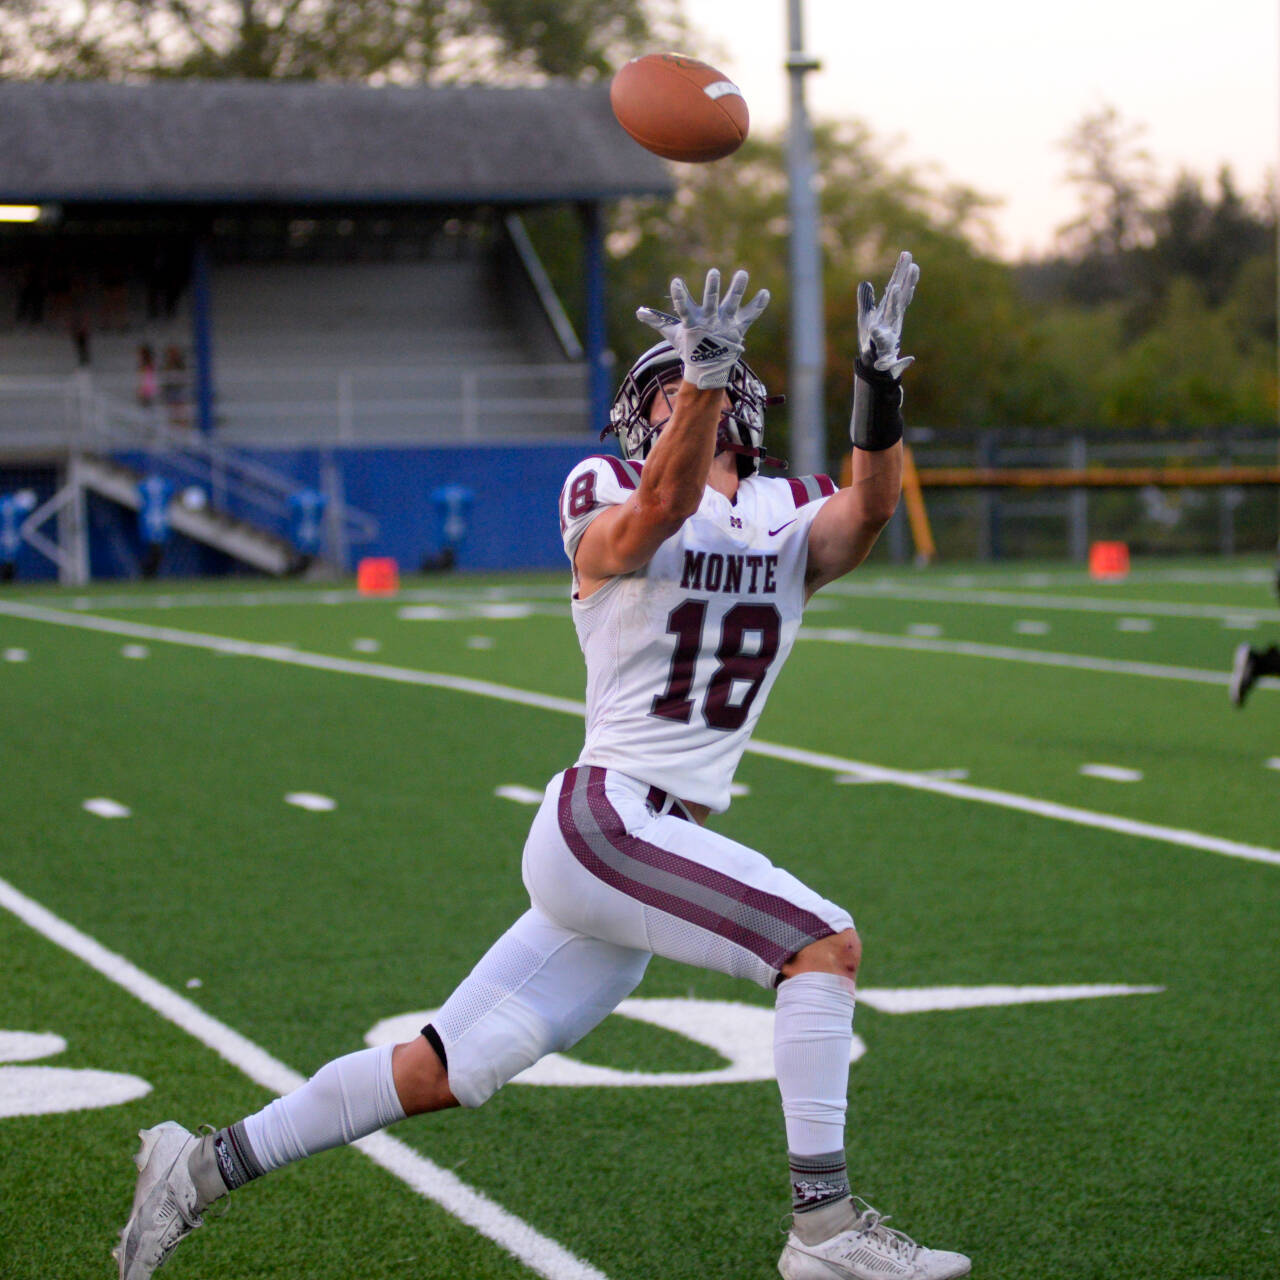 RYAN SPARKS | THE DAILY WORLD Montesano wide receiver Mason Rasmussen hauls in a 59-yard touchdown pass in the second quarter of the Bulldogs’ 38-7 win over Aberdeen on Friday at Stewart Field in Aberdeen.